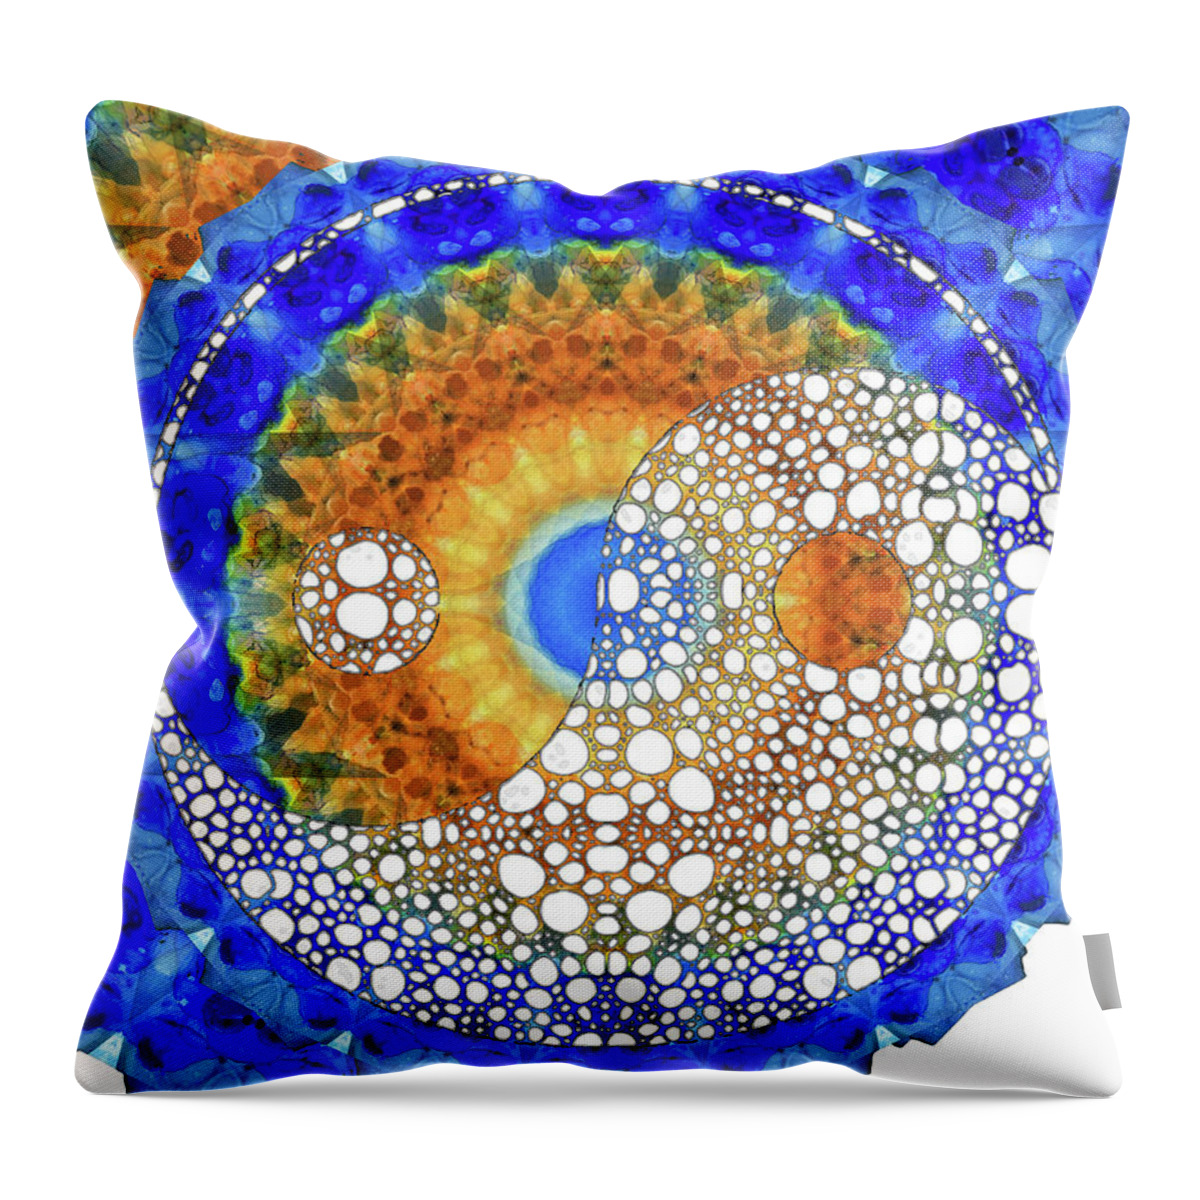 Yin Throw Pillow featuring the painting Yin And Yang - Moving Into Balance - Sharon Cummings by Sharon Cummings